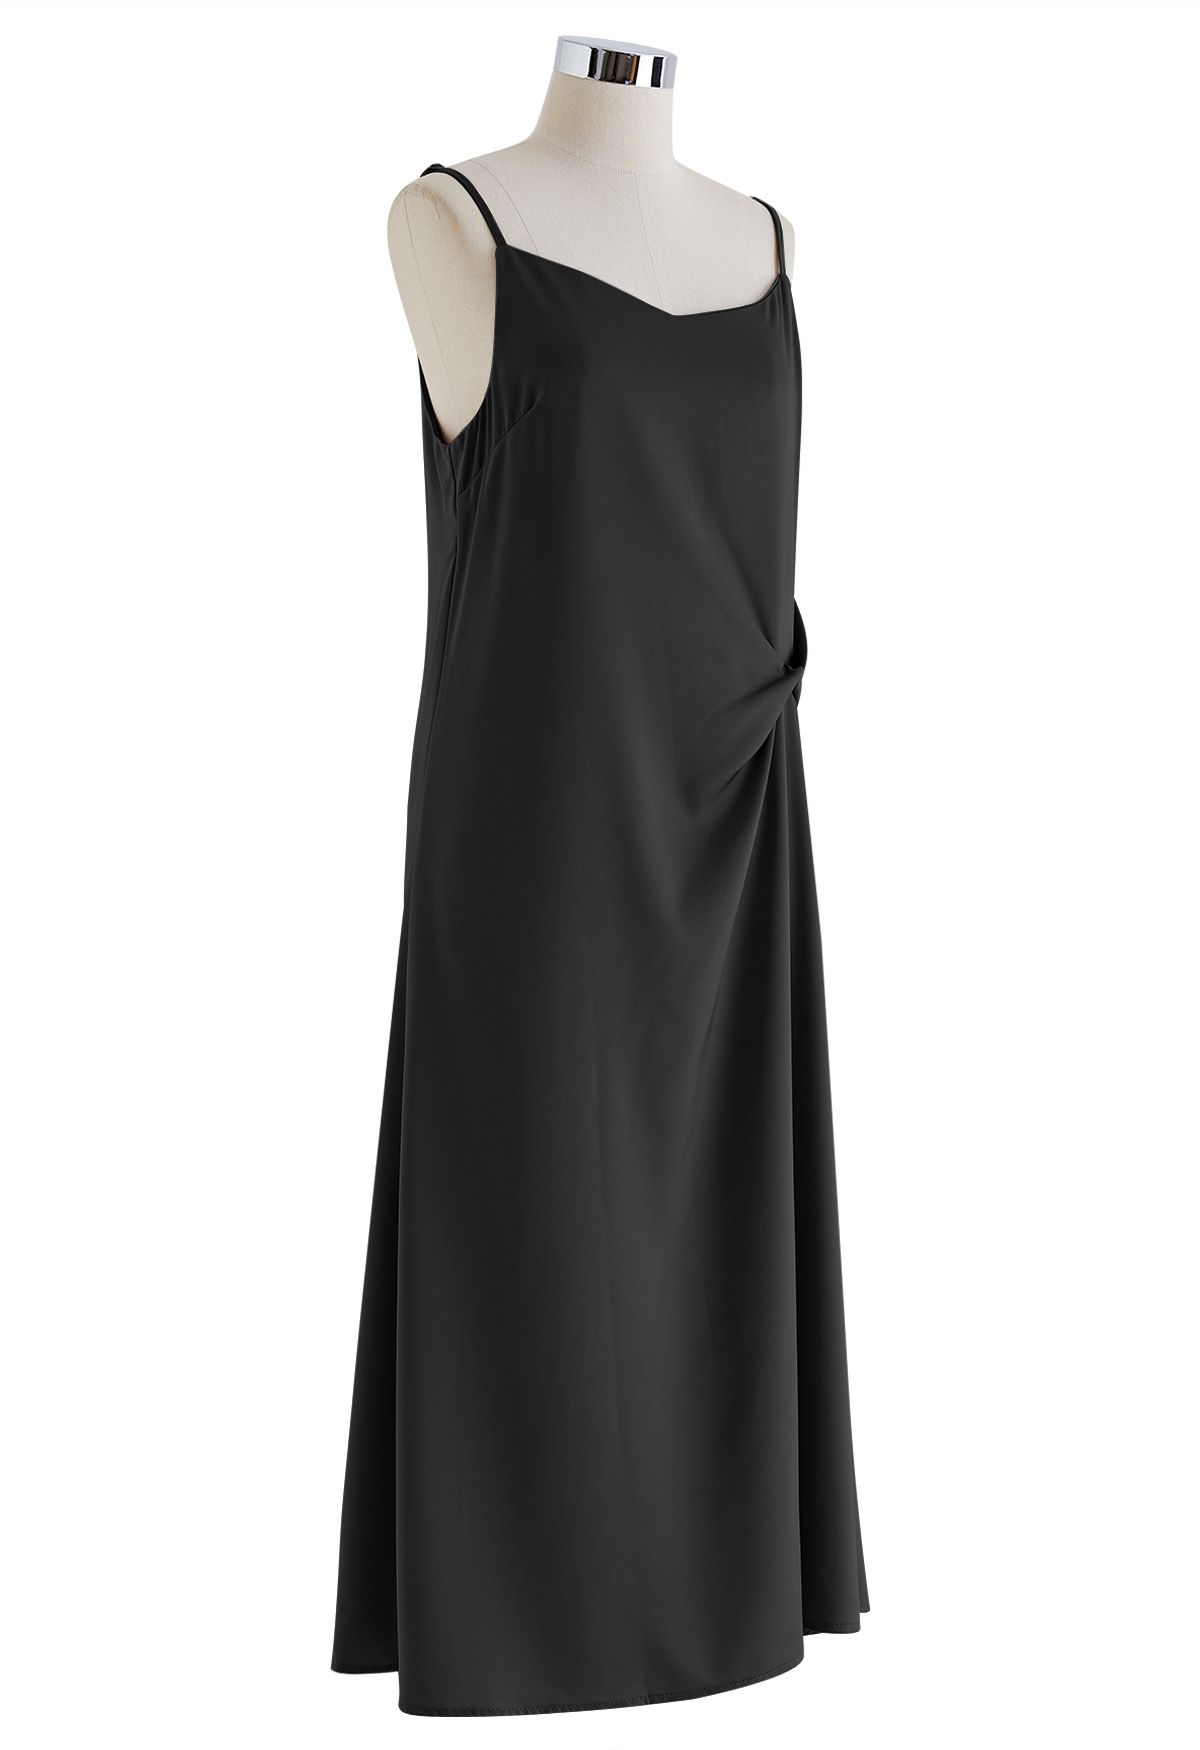 Sweetheart Neck Side Twisted Satin Cami Dress in Black